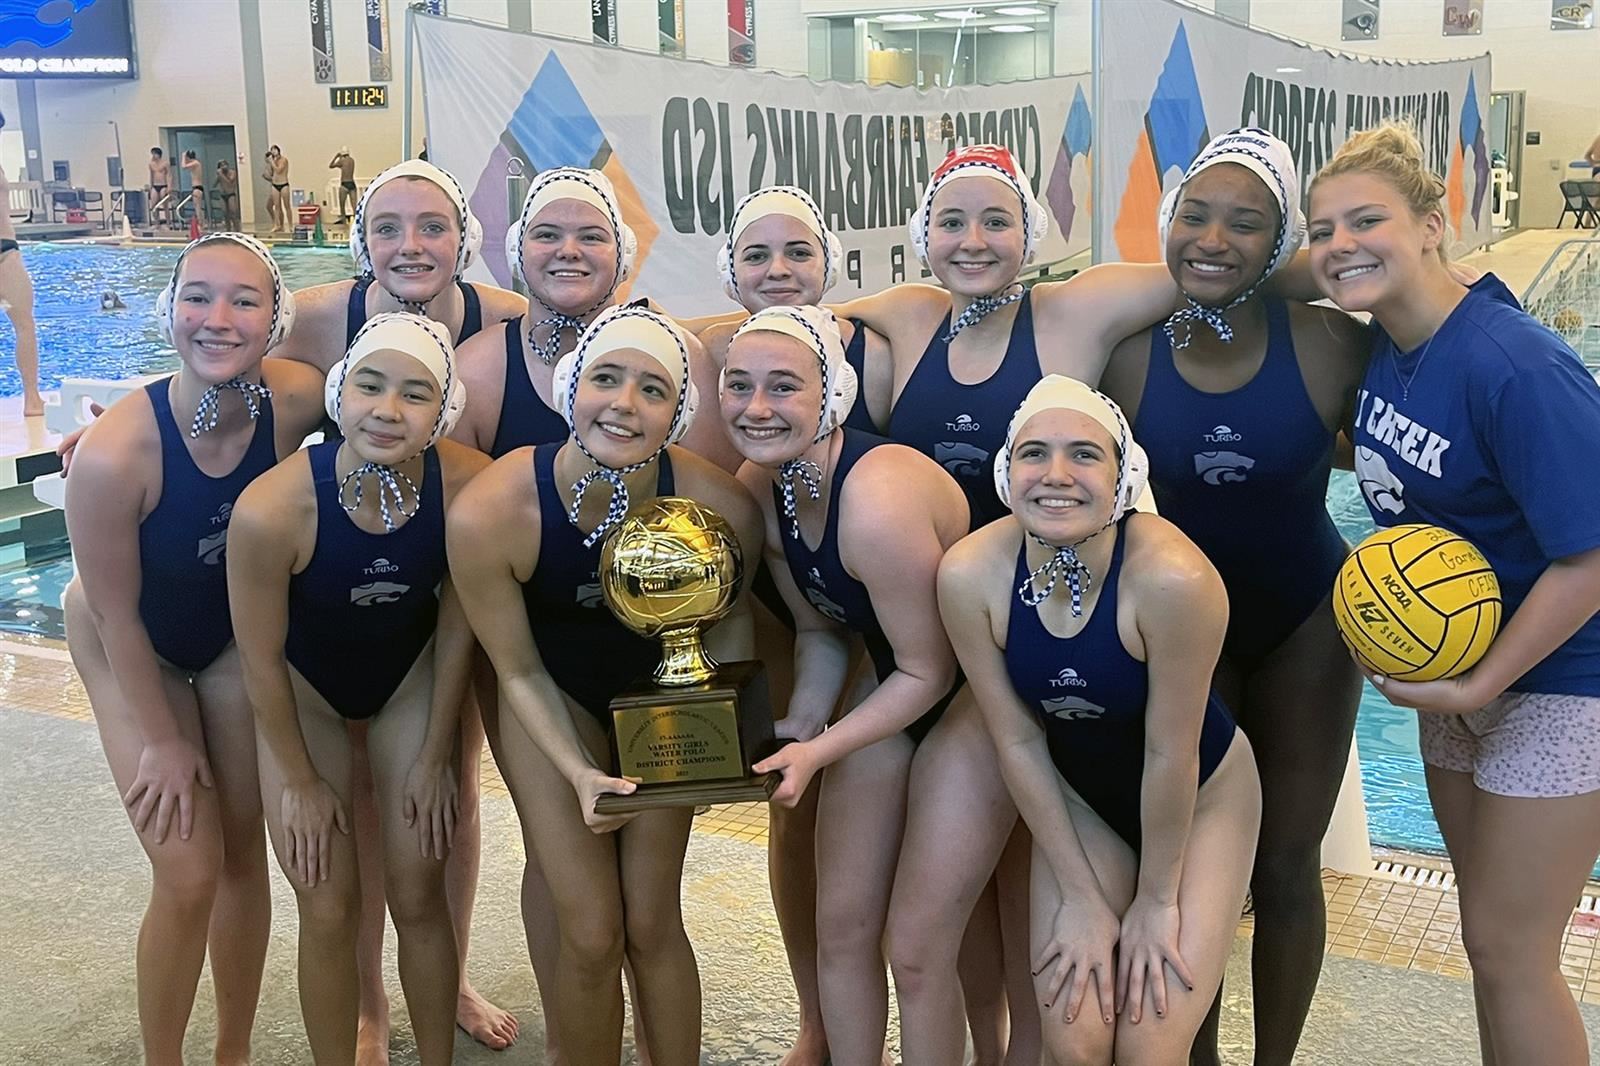 The Cypress Creek High School girls’ water polo team won the District 17-6A Championship. The Cougars posted a 10-0 record.